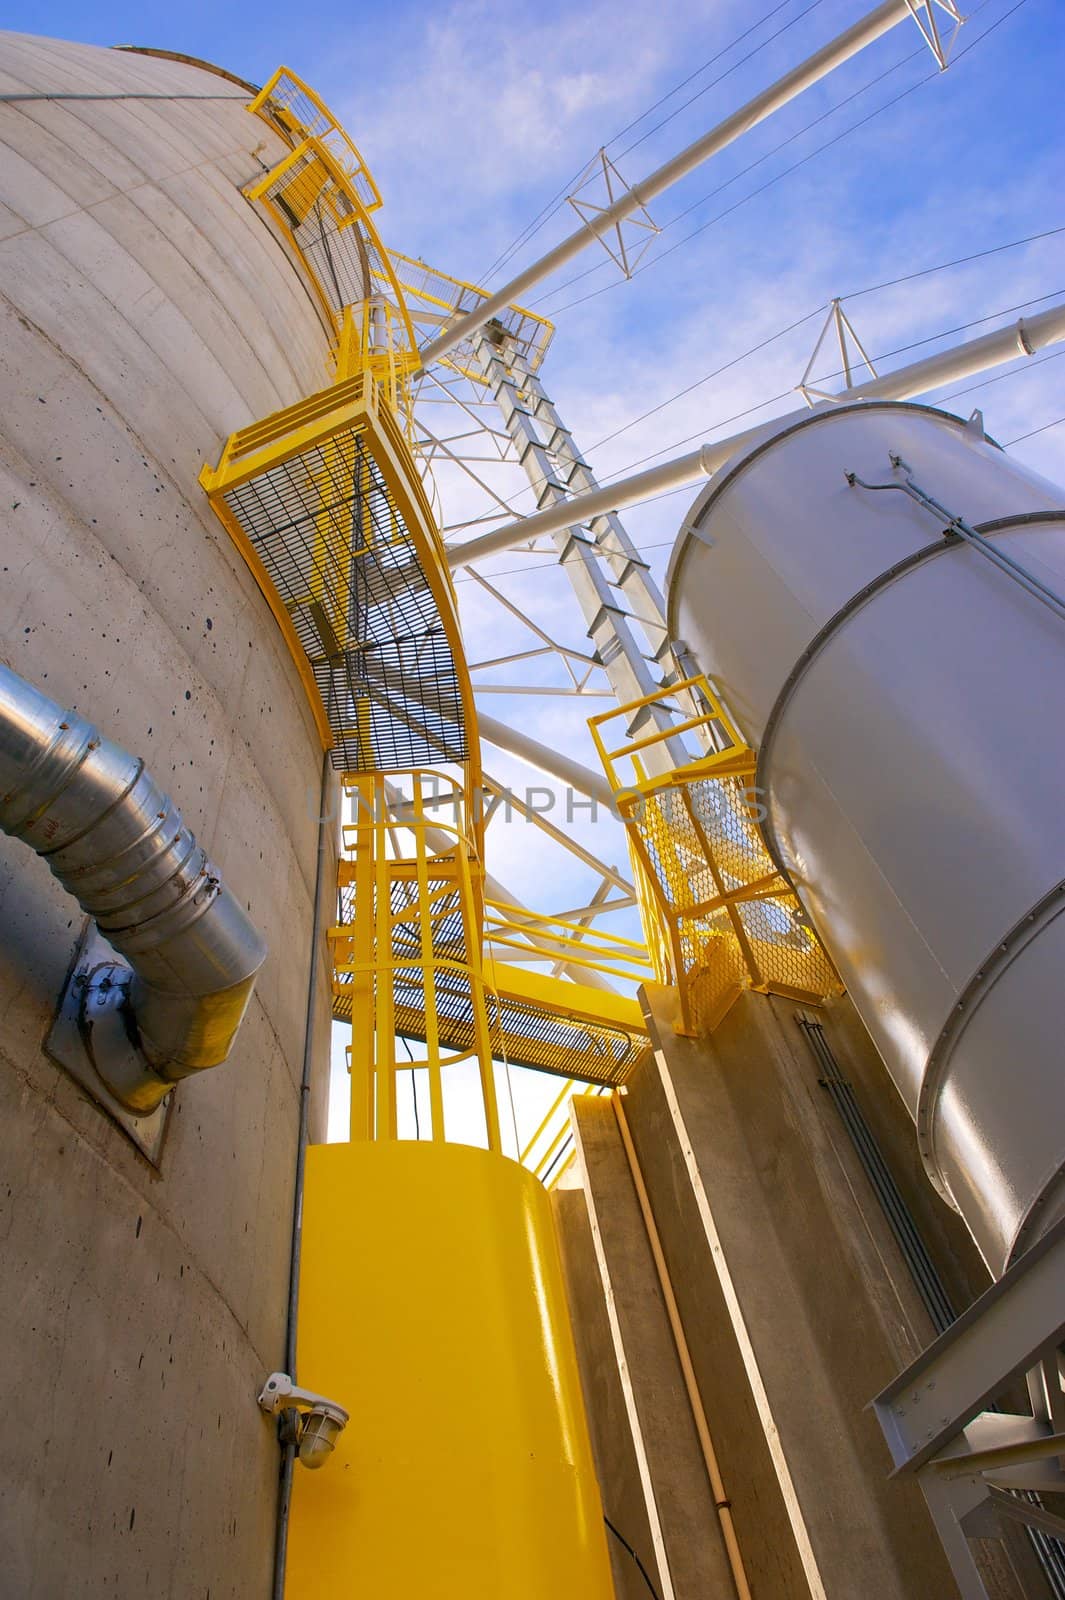 Vertical shot of towering grain silos made of concrete with metal conduits and yellow access areas at a food processing plant